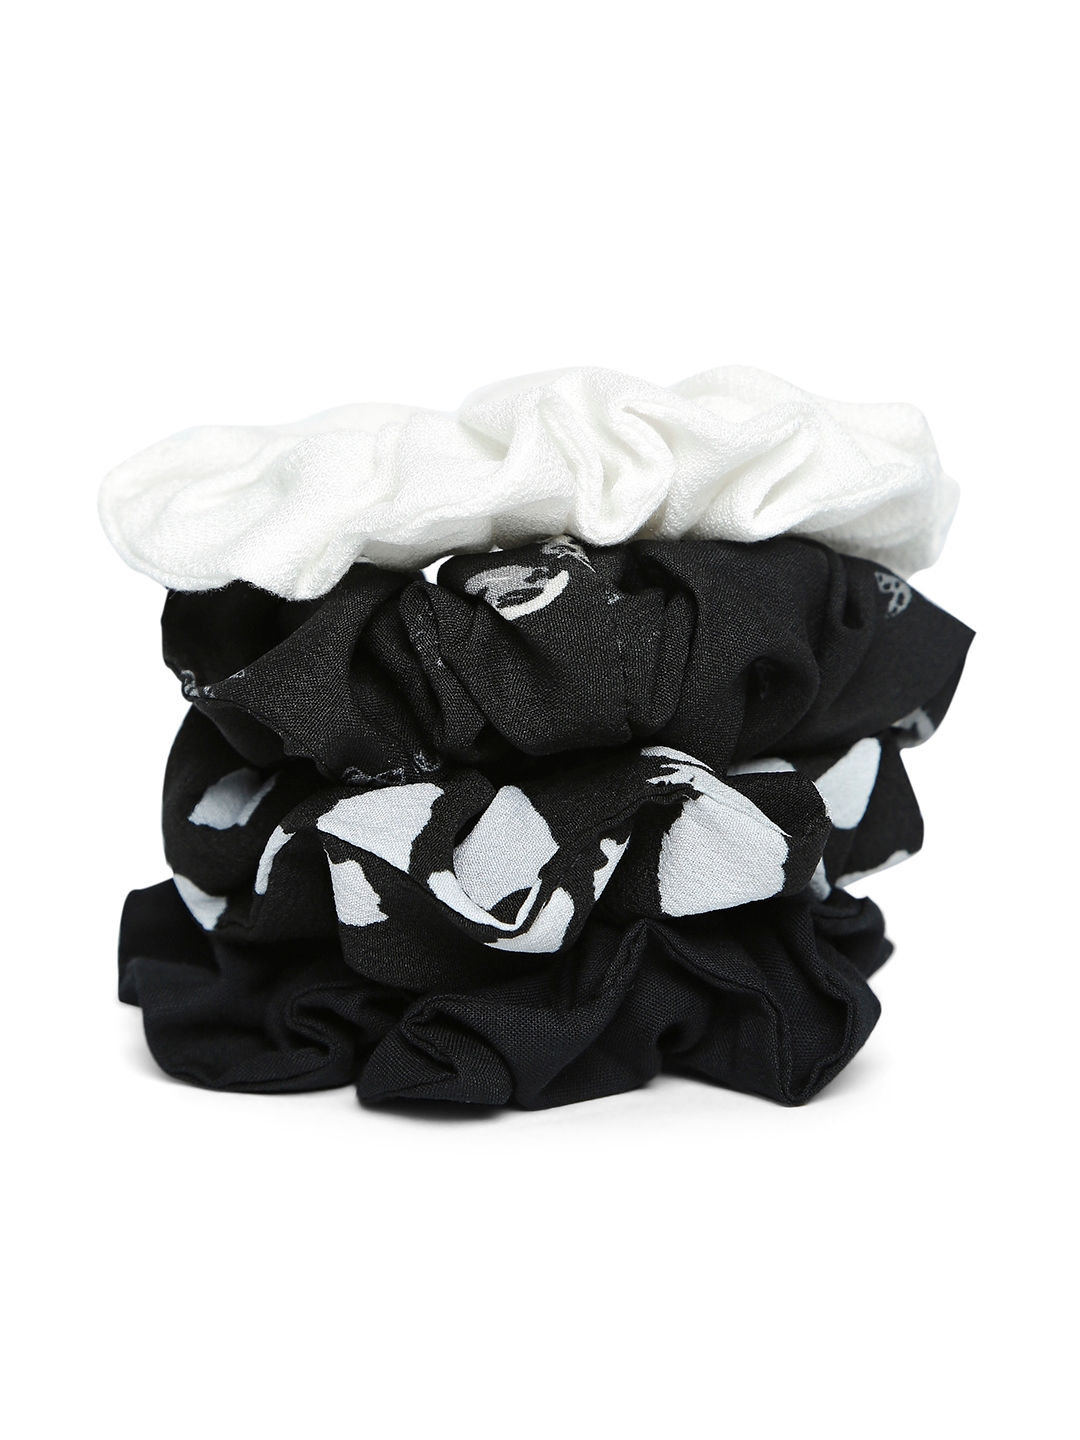 Lilly & sparkle | Lilly & Sparkle Black And White Scrunchies Set Of 4